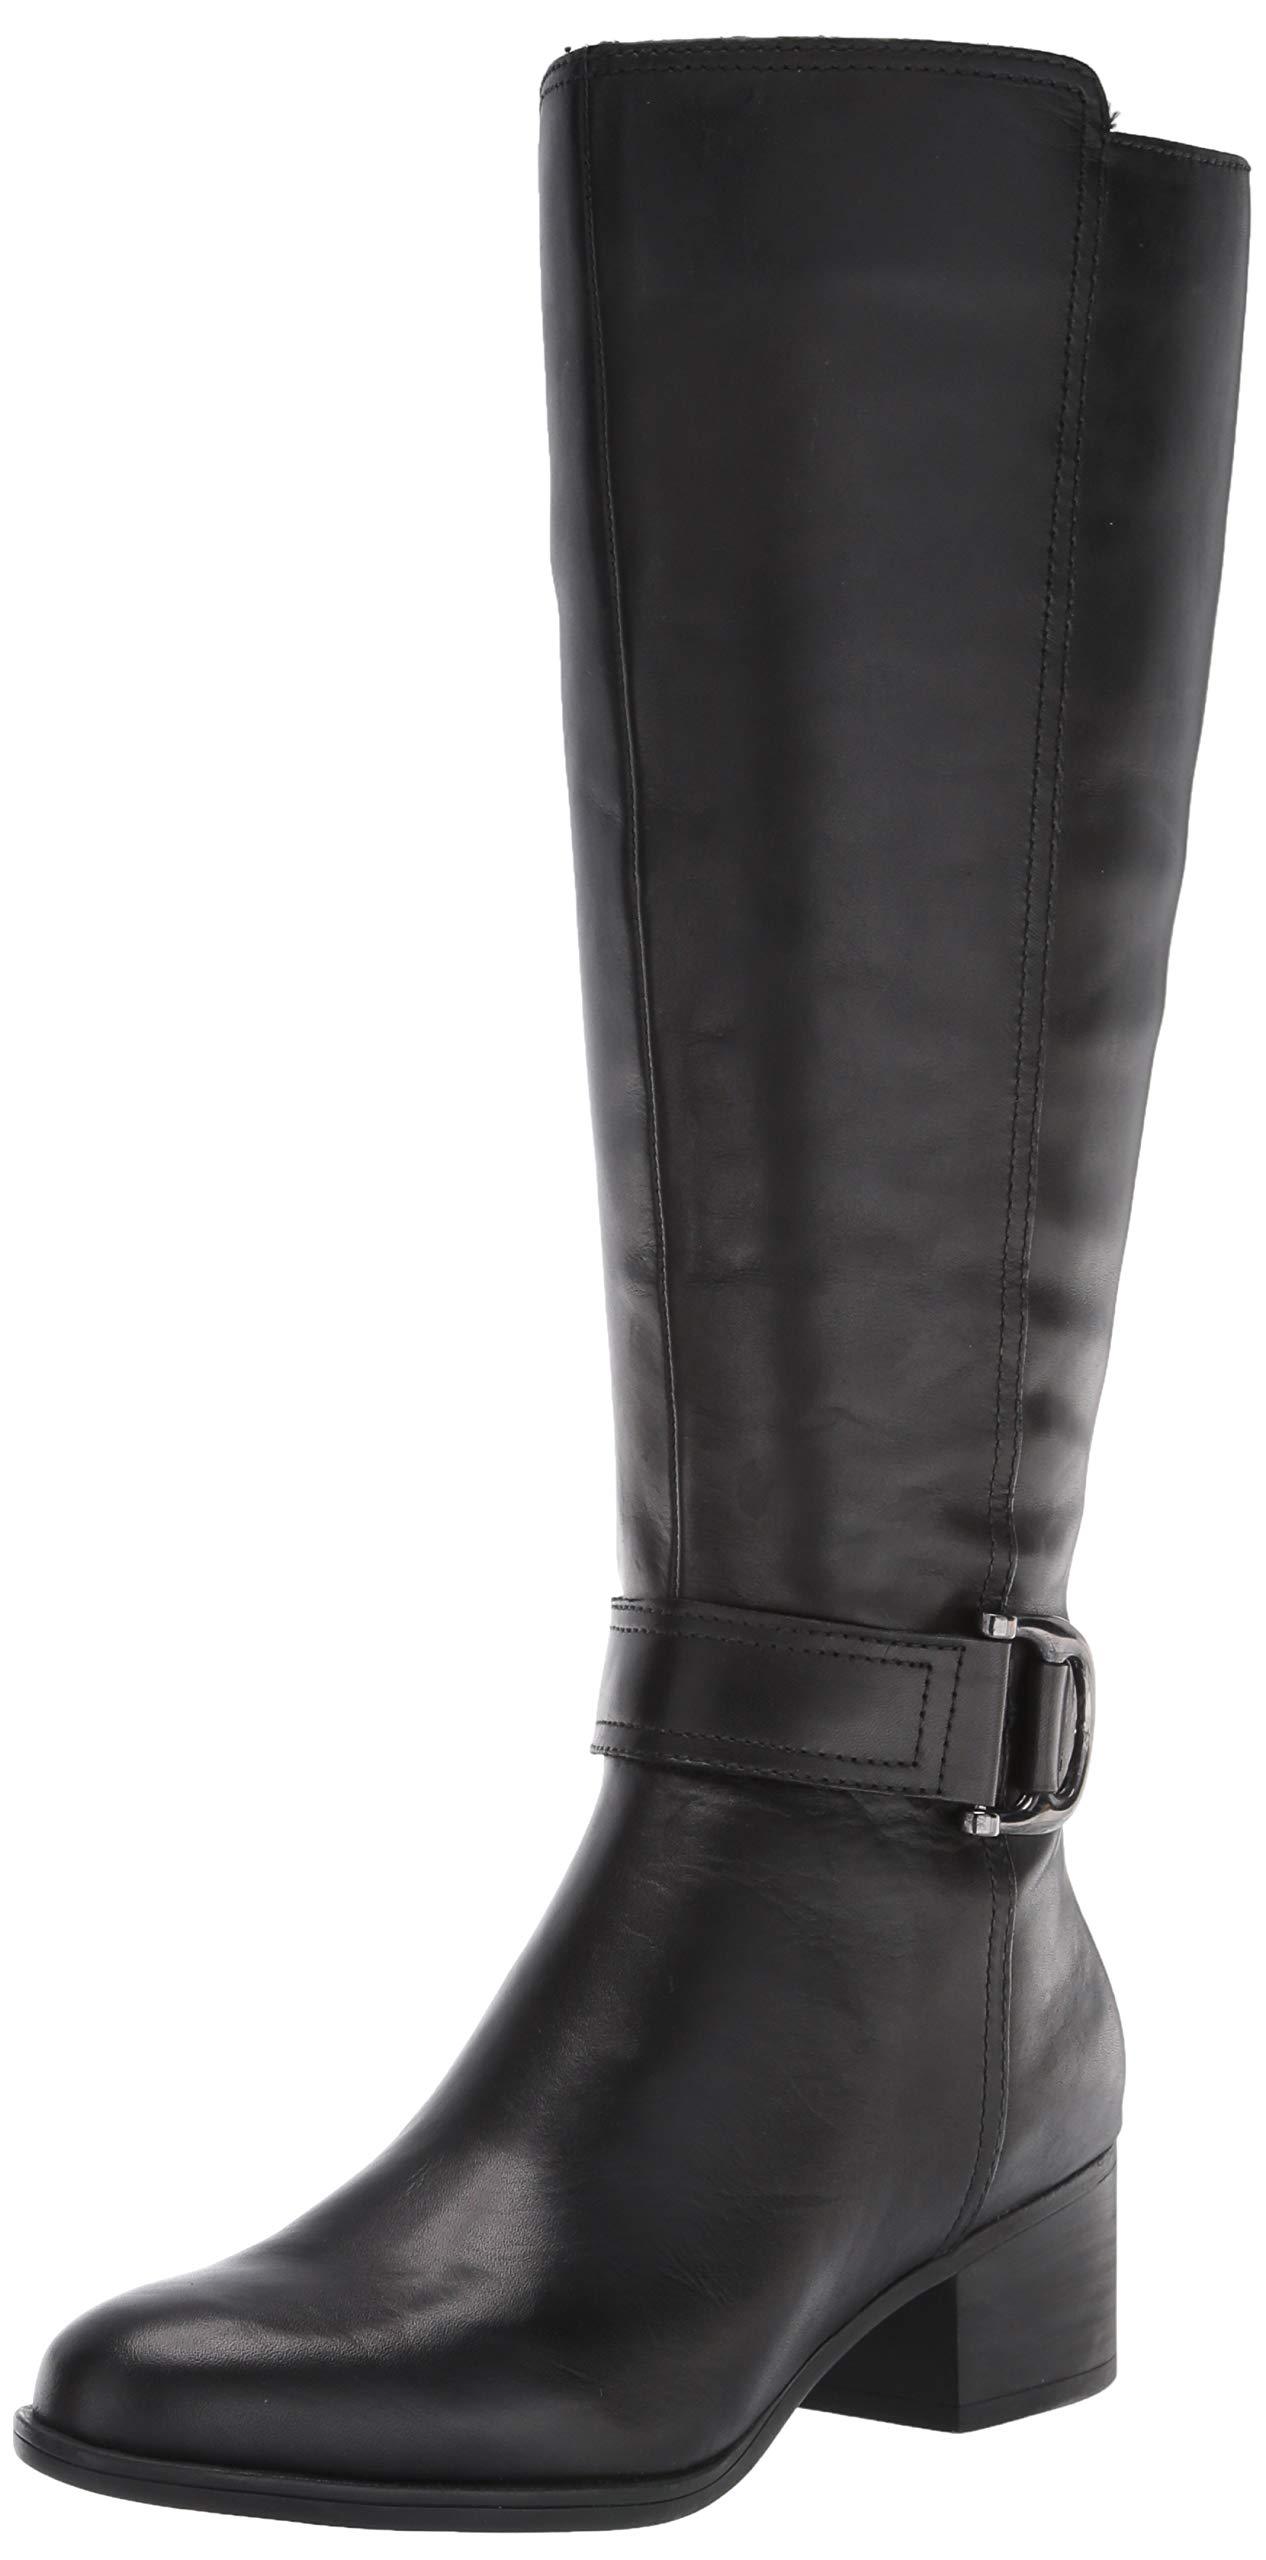 Naturalizer Leather Womens Kelso High Shaft Boots,black Wc,9.5 M - Lyst